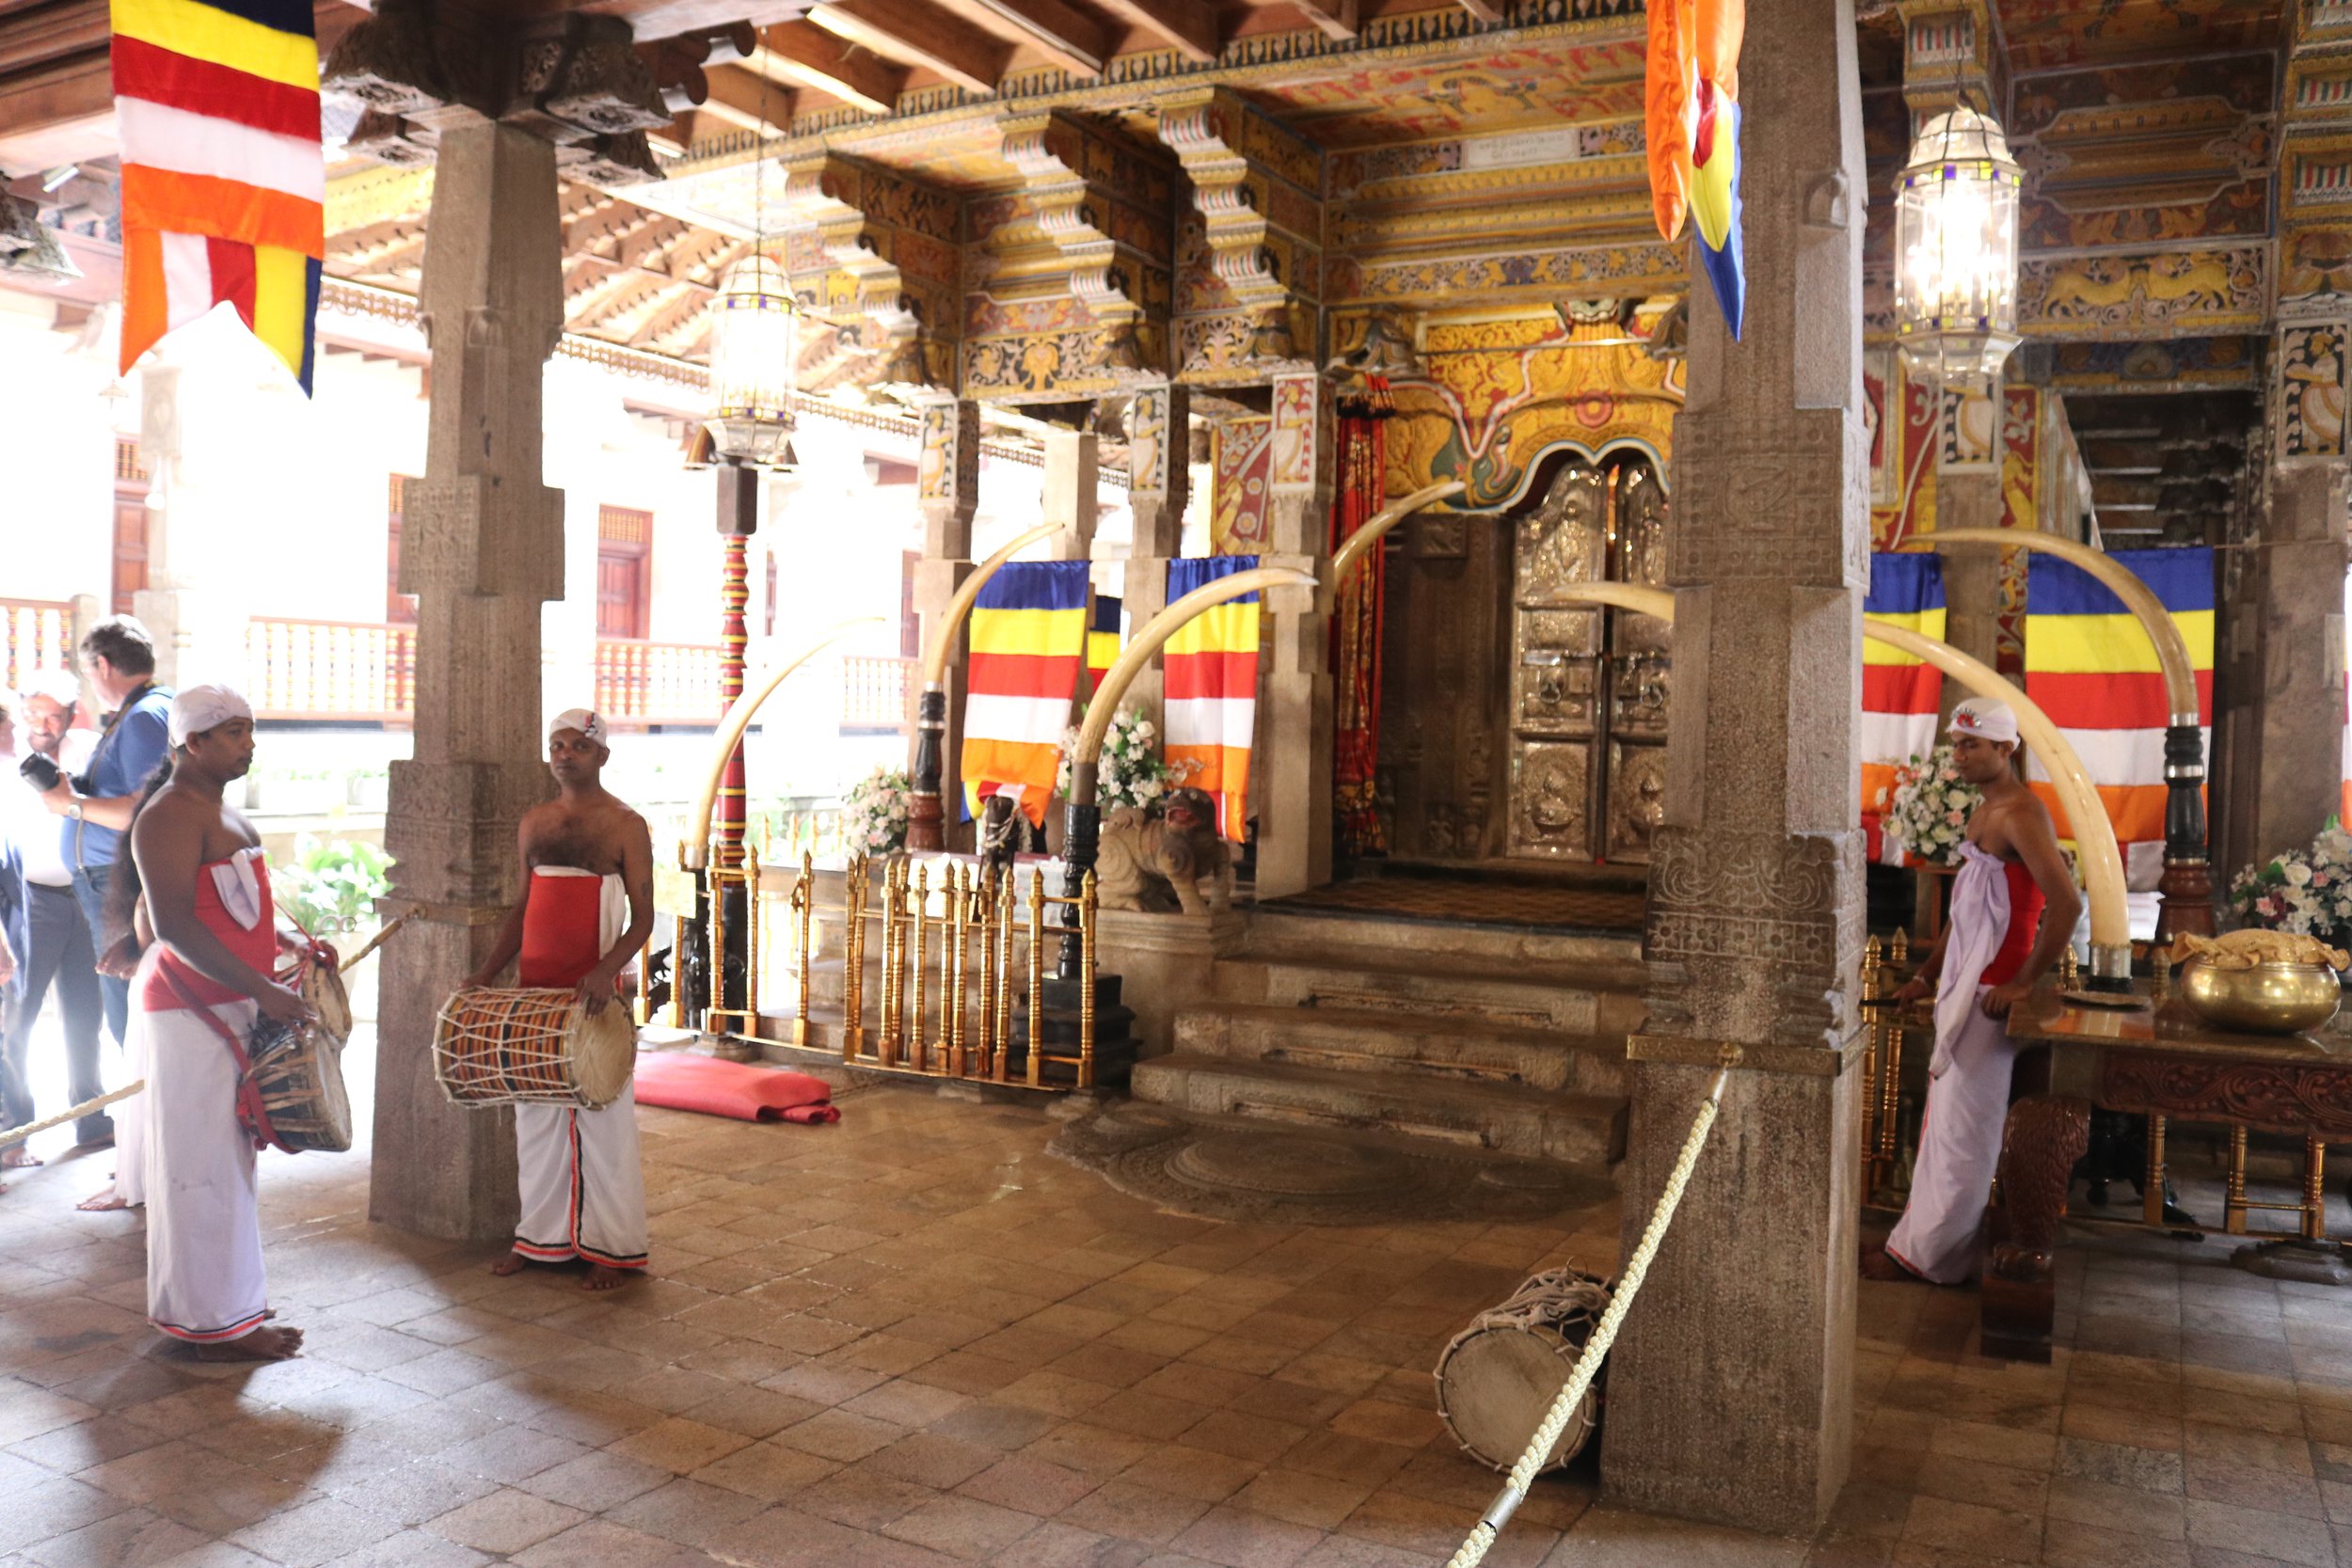 Temple of Tooth Relic, Kandy